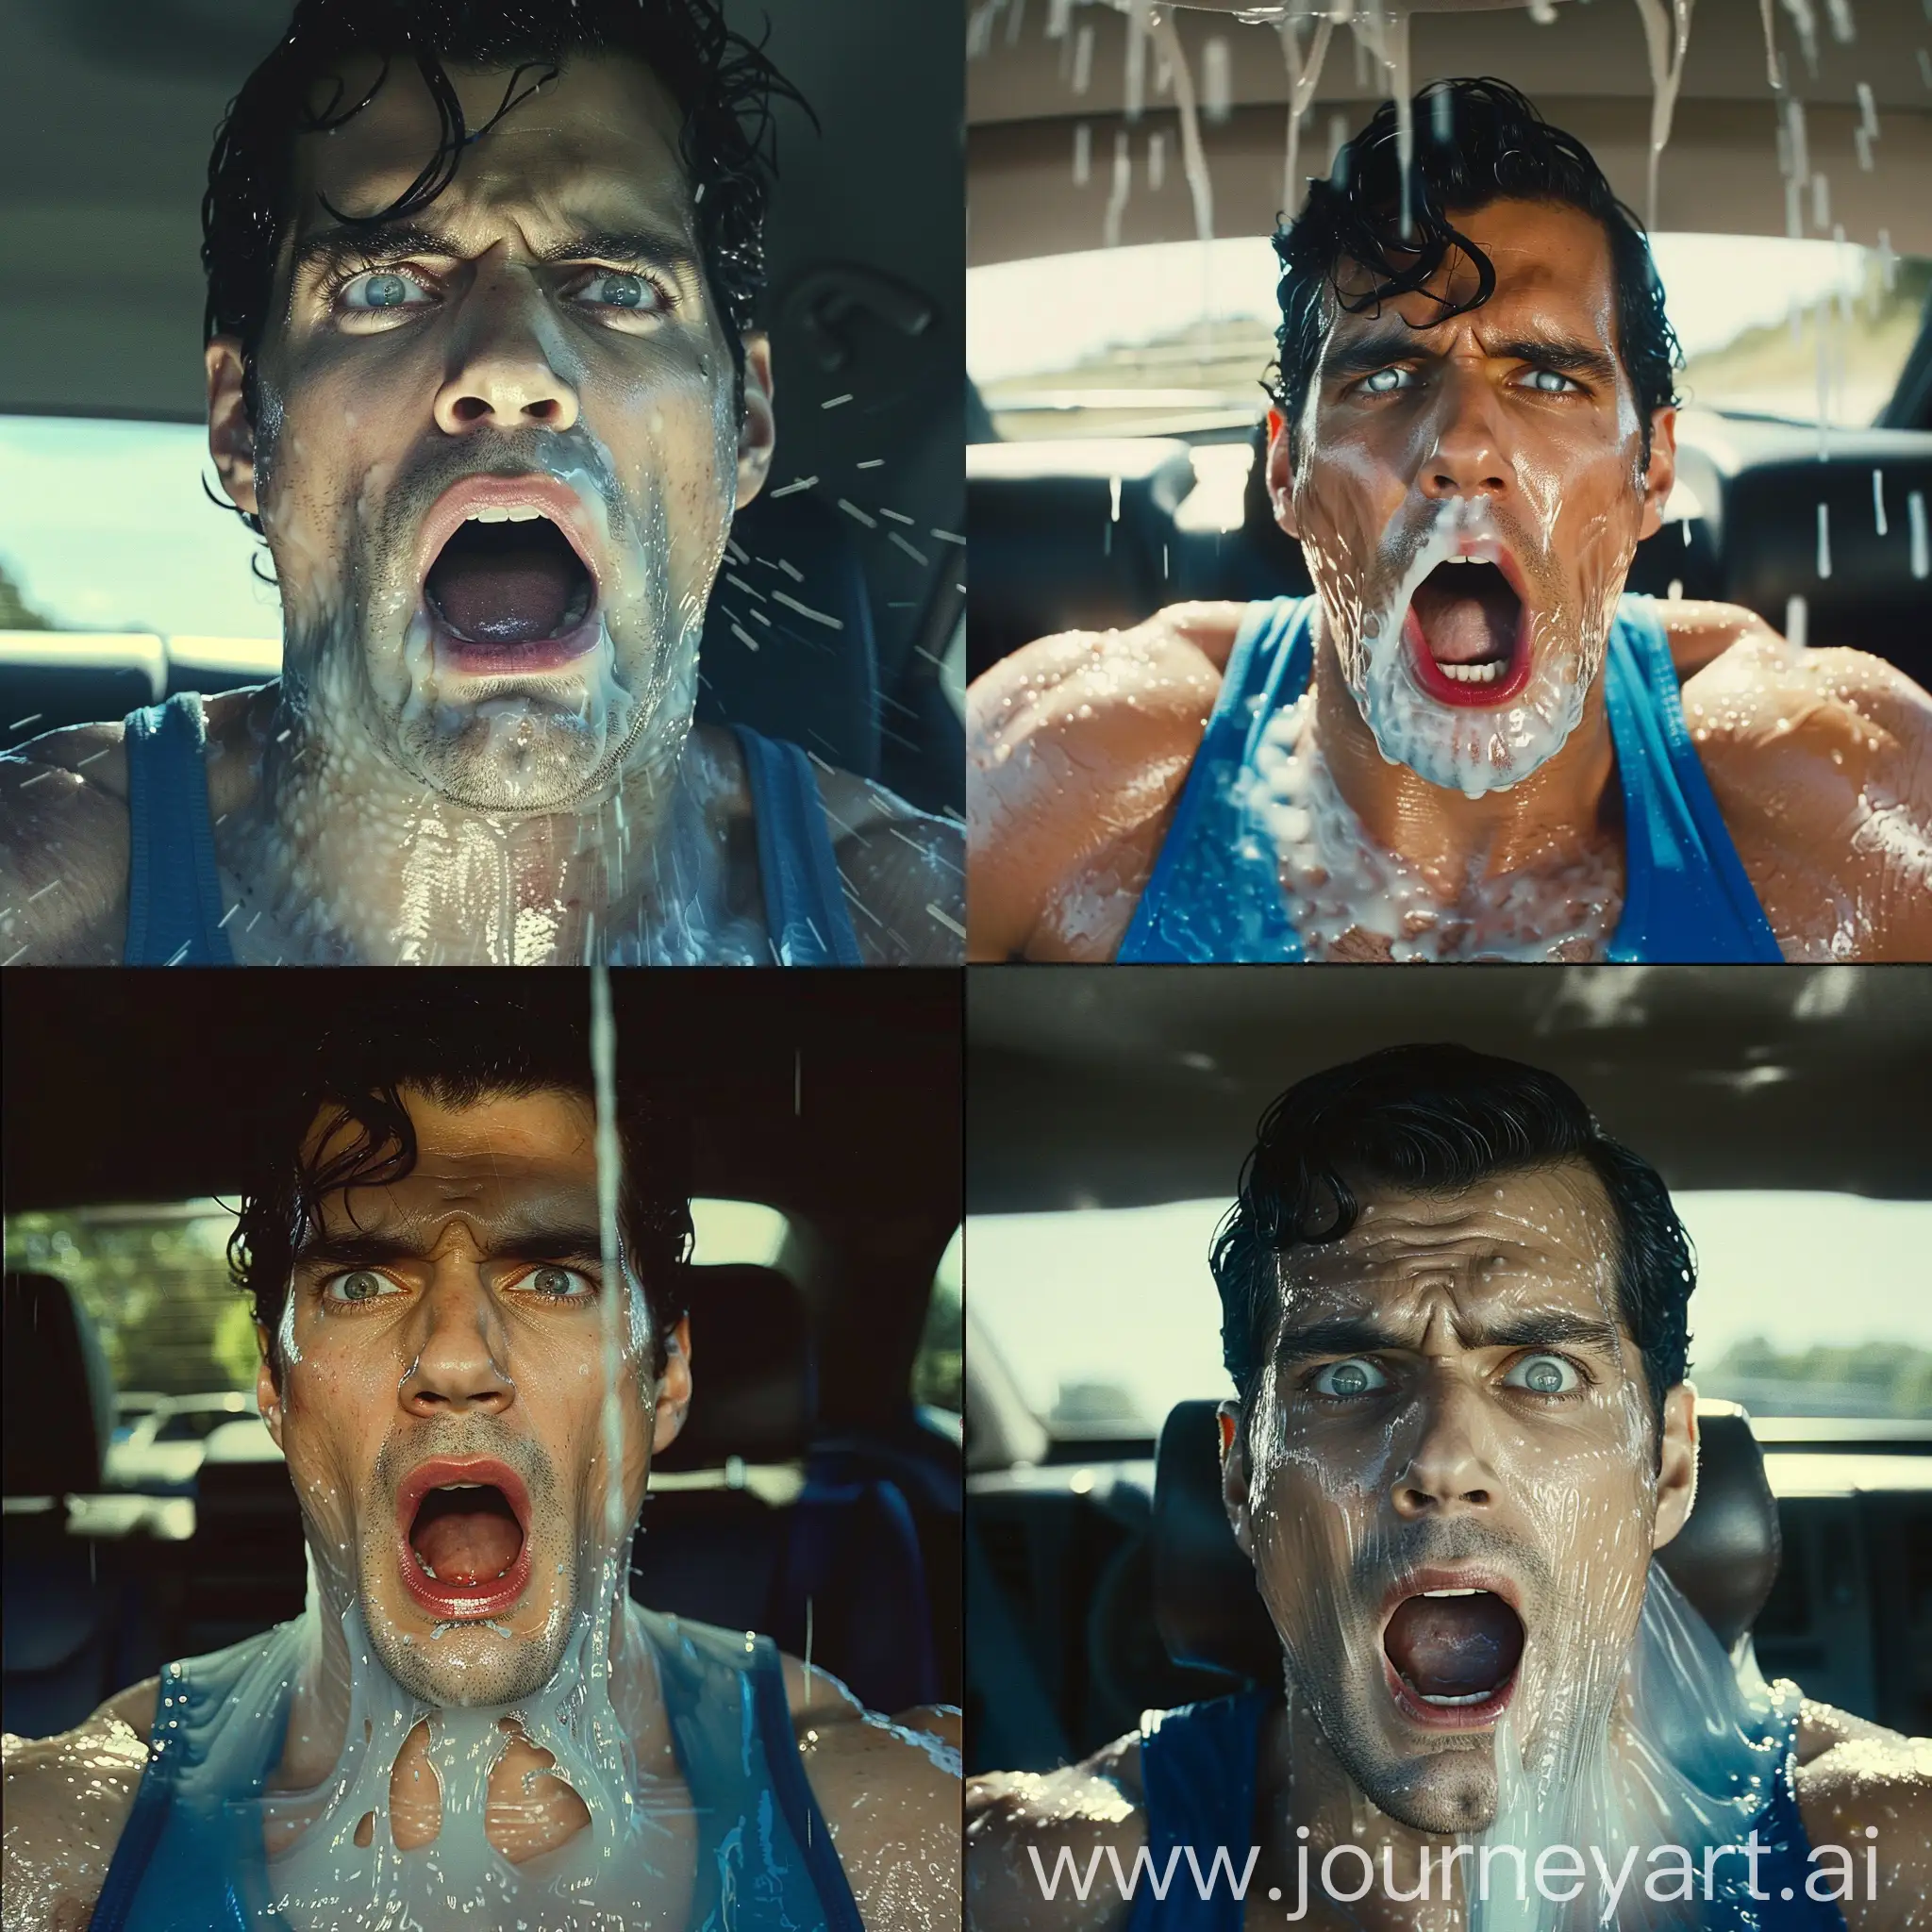 Henry Cavill Inside a car, sweaty glistening skin, with a yawning mouth, gelatinous transparent drool, drooling mouth,, Good looking face of Henry Cavill, wearing a blue tank top, with his eyes white, white slime drool, inside a car, daylightbackground